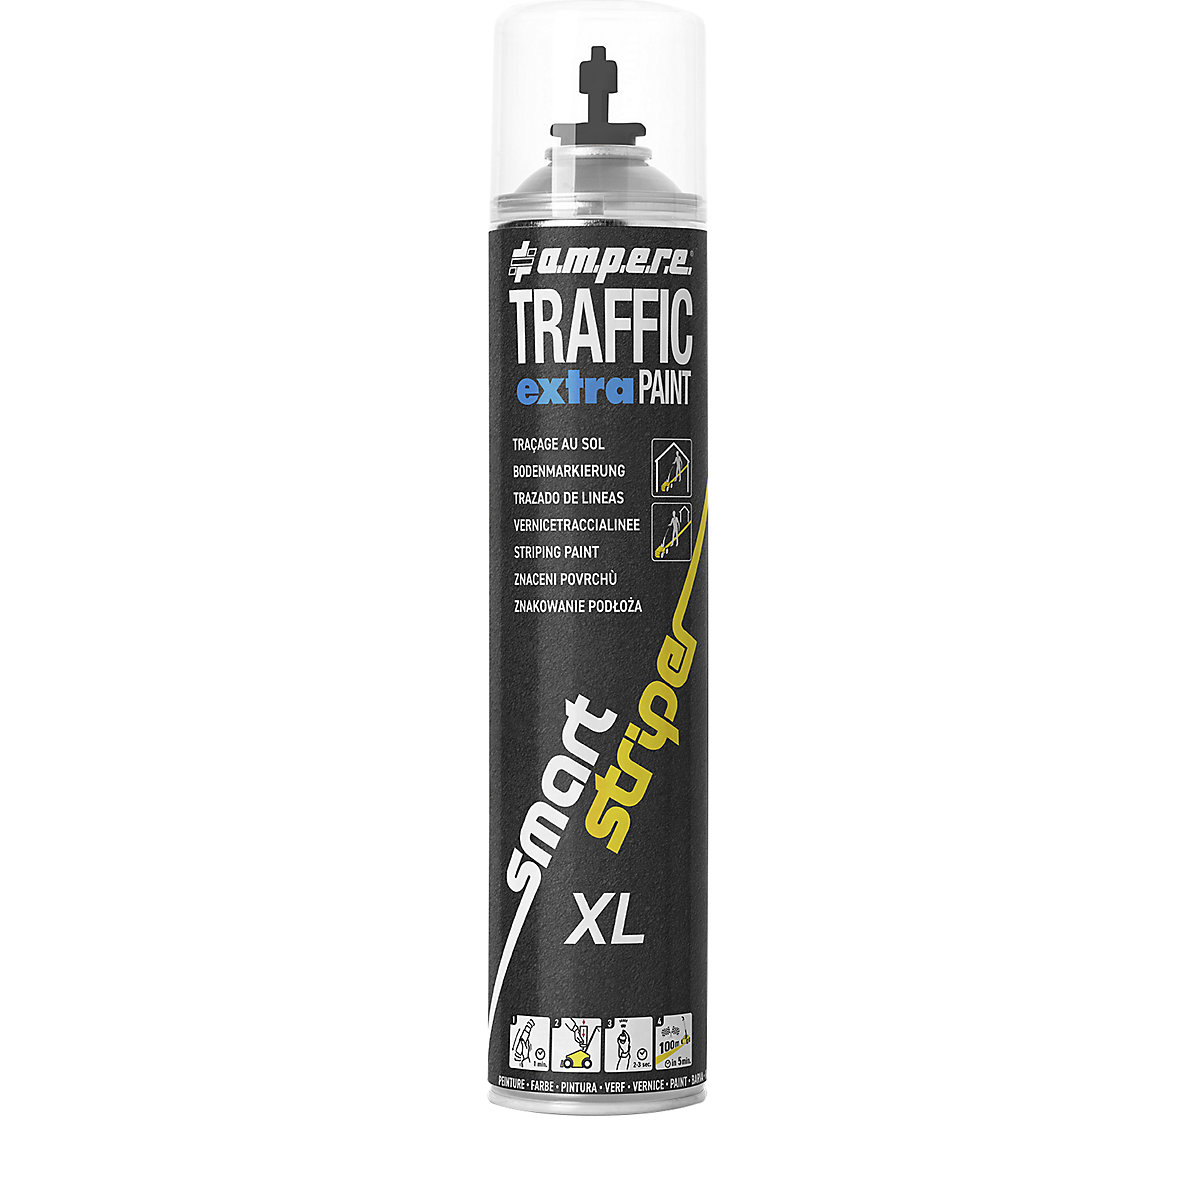 Traffic extra Paint® XL marking paint - Ampere